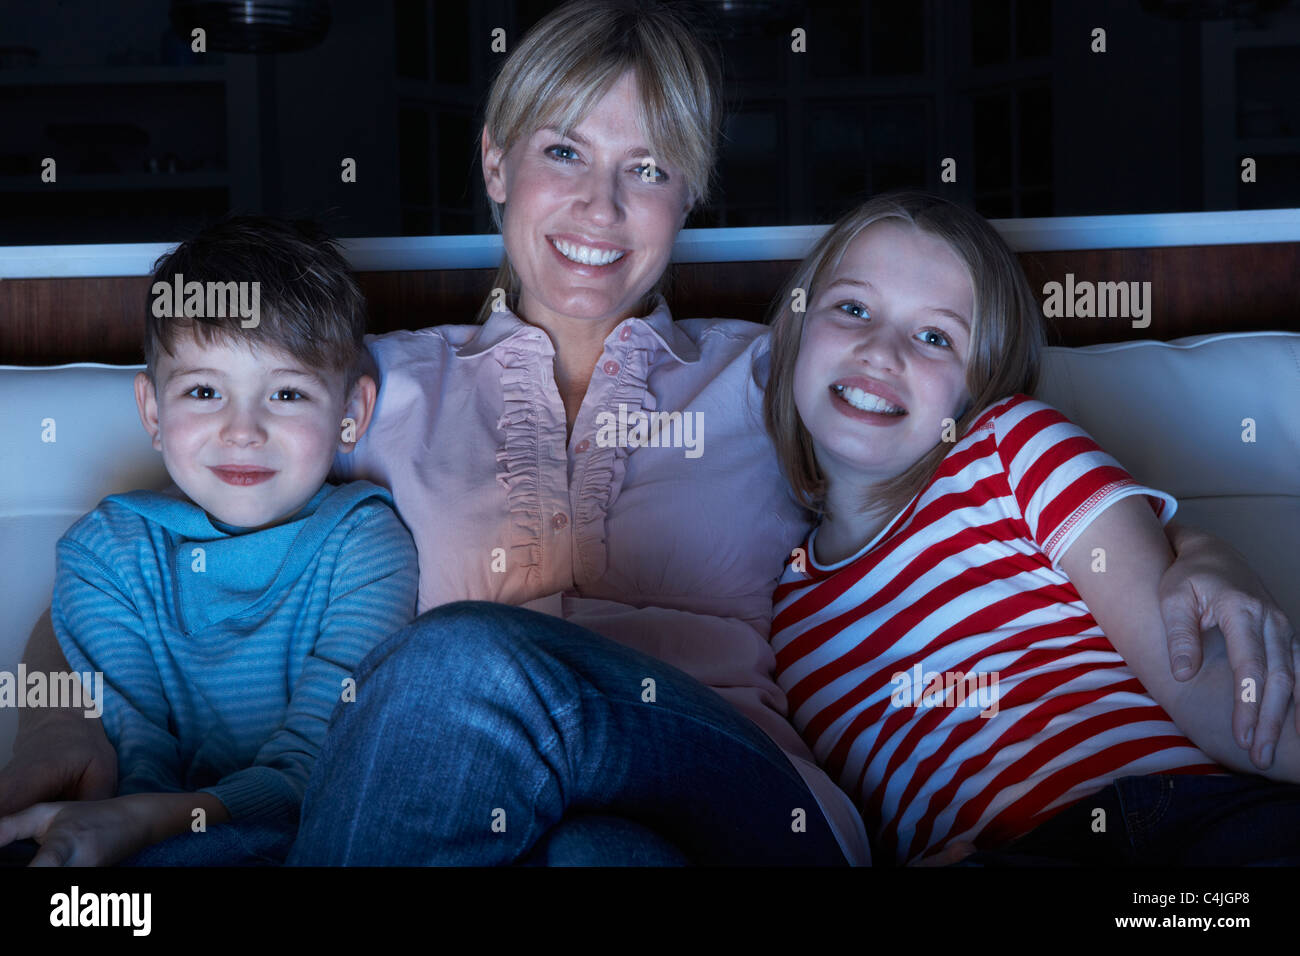 Mother And Children Watching Programme On TV Sitting On Sofa Together Stock Photo